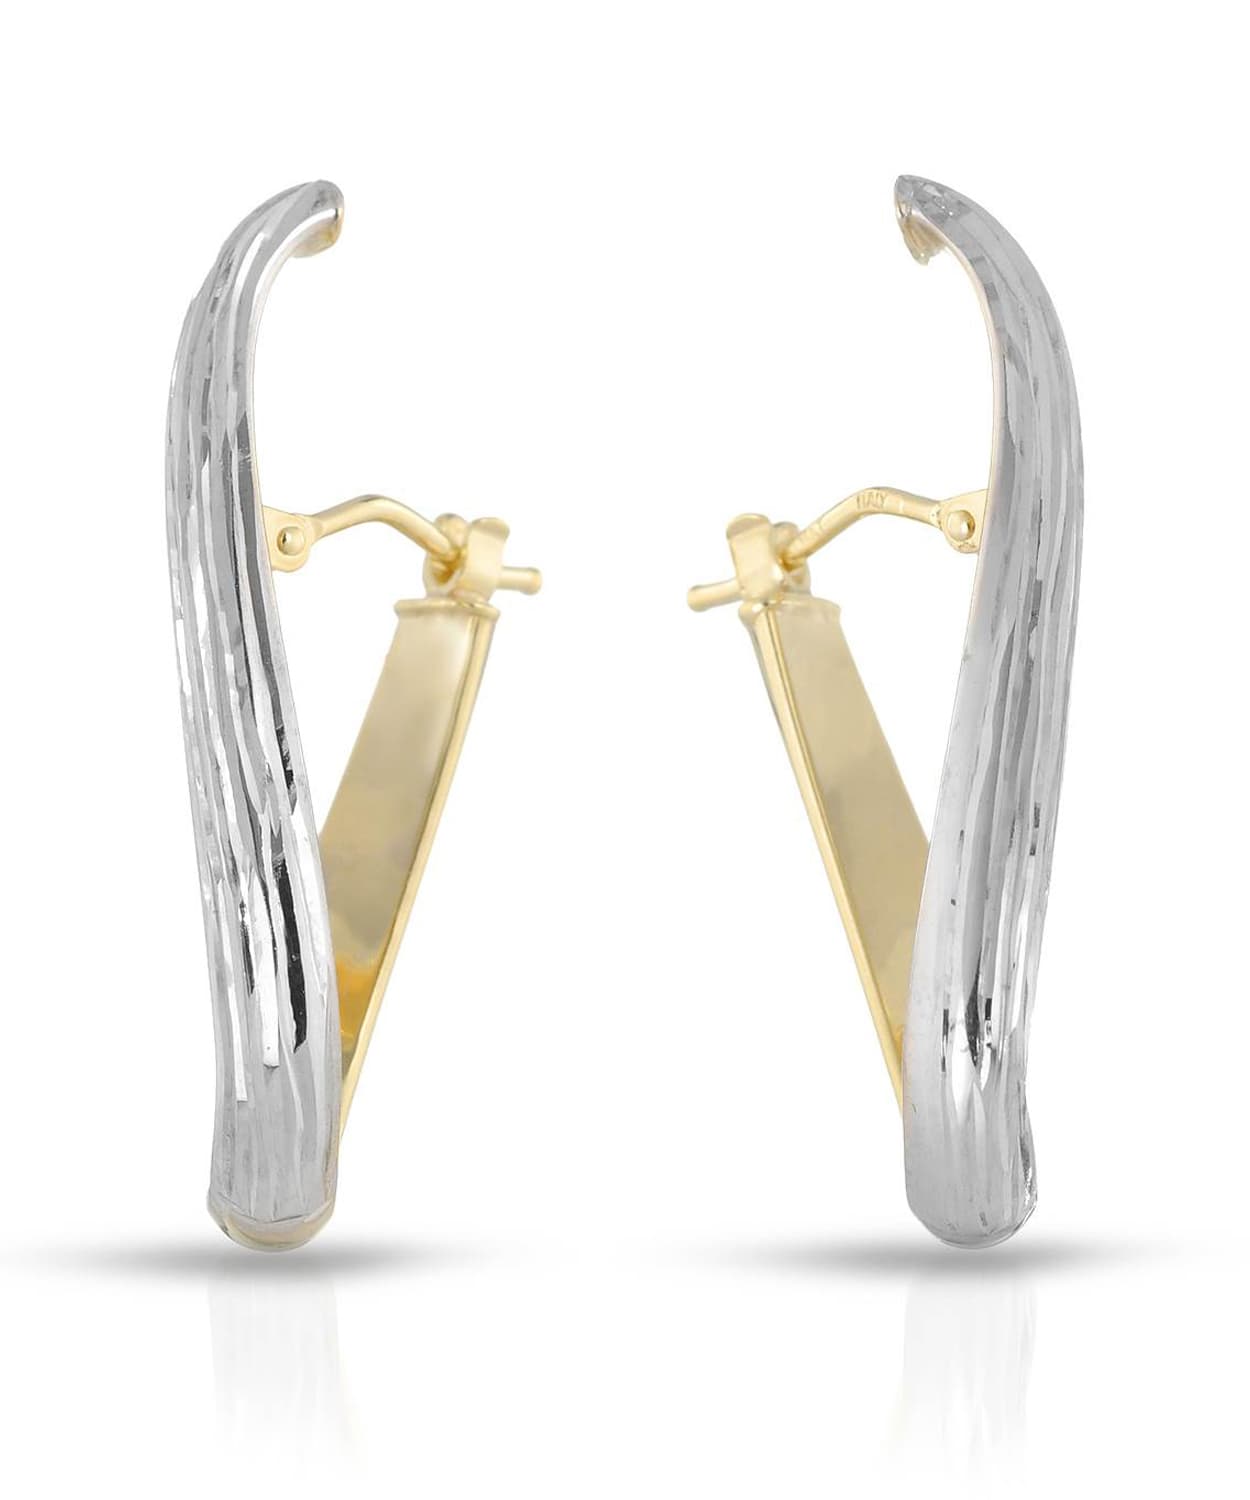 14k Gold Contemporary Earrings View 1